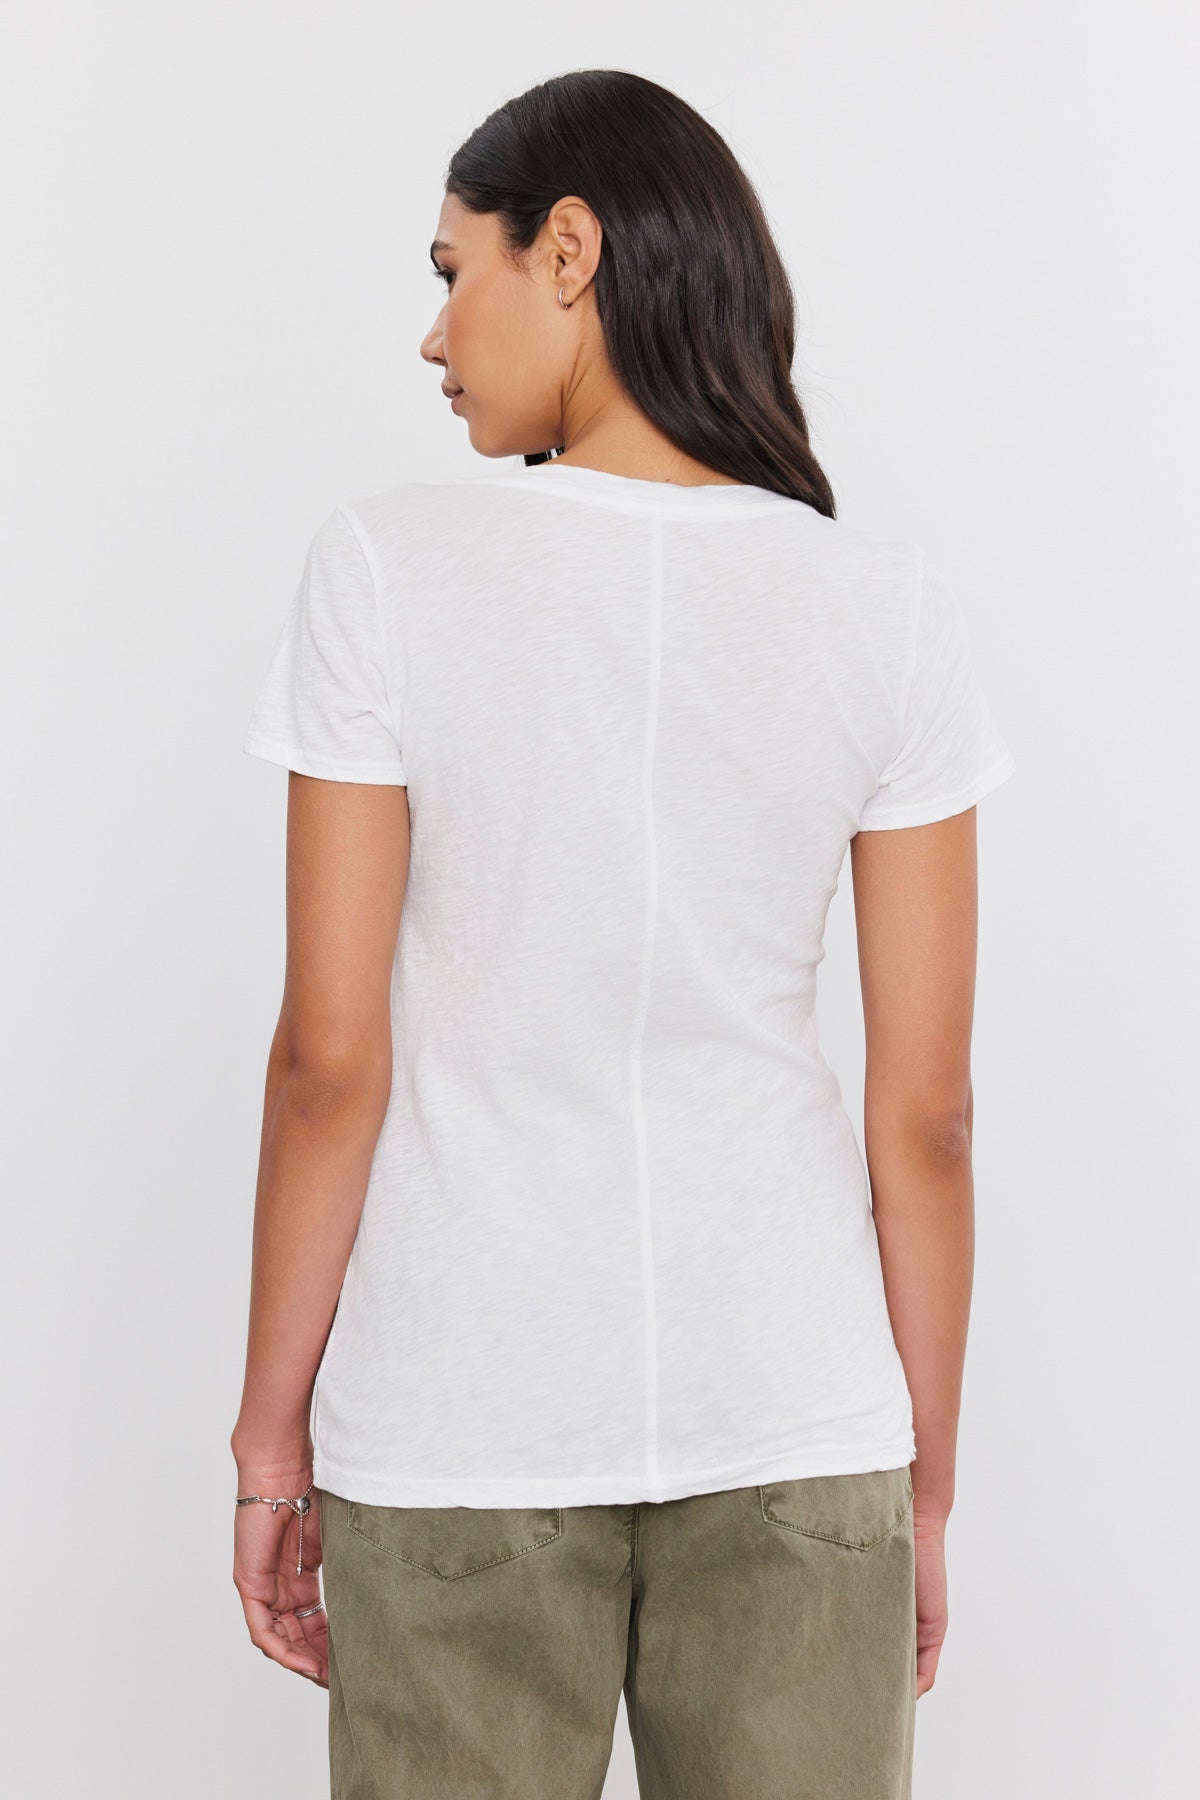 The back view of a woman wearing a LILITH COTTON SLUB V-NECK TEE by Velvet by Graham & Spencer made of luxe cotton slub and green pants showcases her preppy style.-35586083487937